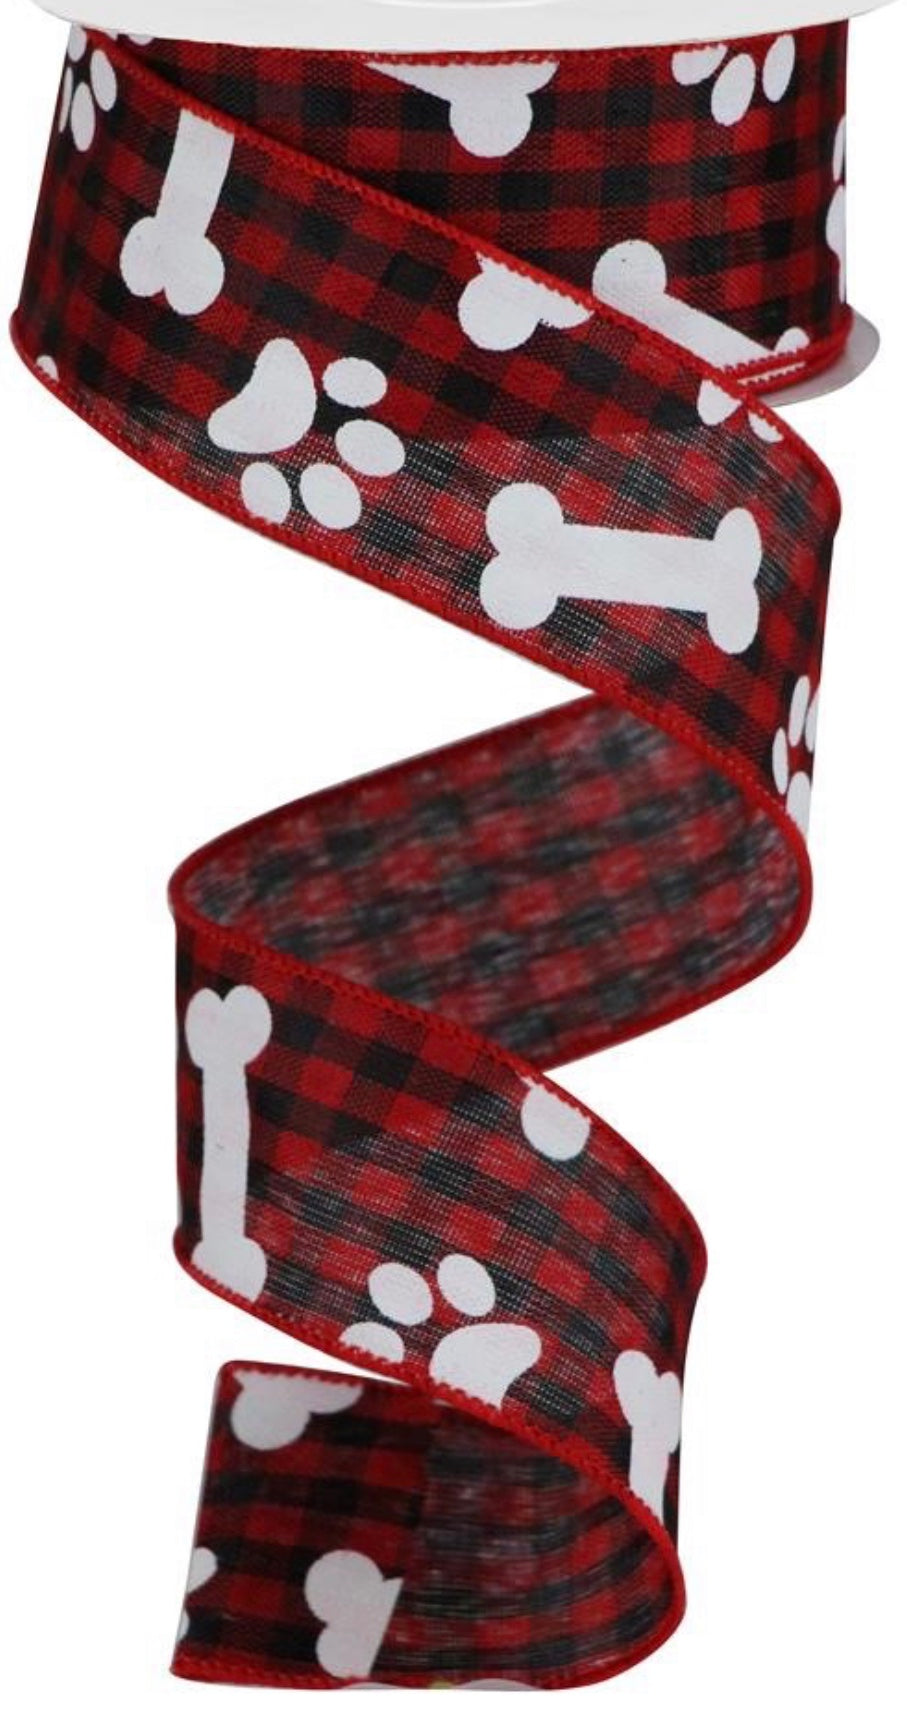 10 Yards - 2.5 Wired Red, Black, and White Paw Print Dog Ribbon